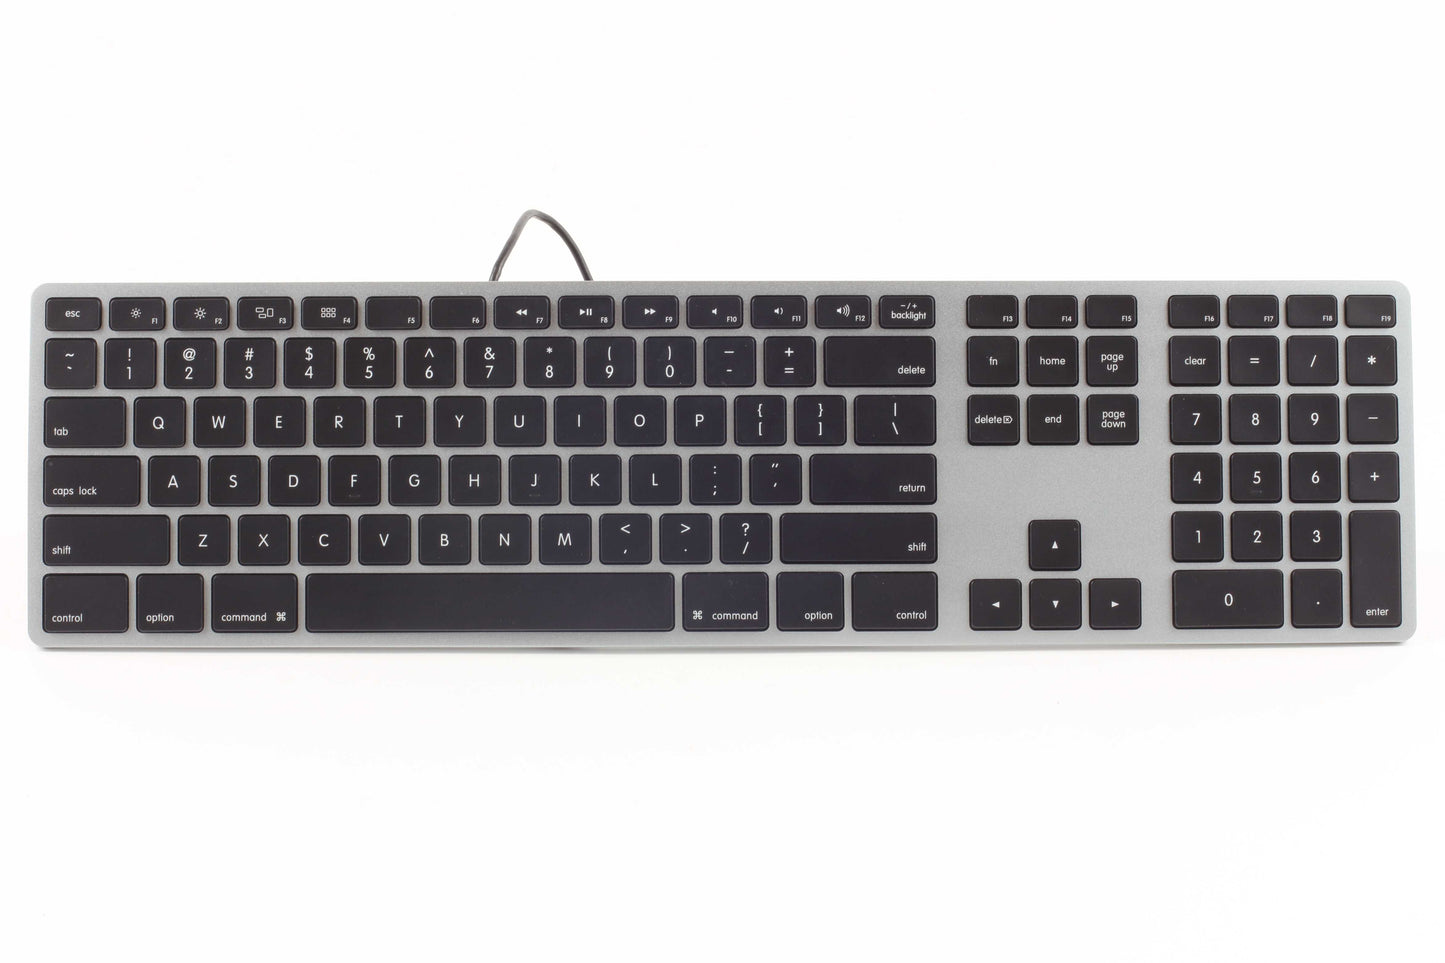 RGB Backlit Wired Aluminum Keyboard for Mac - Space Gray